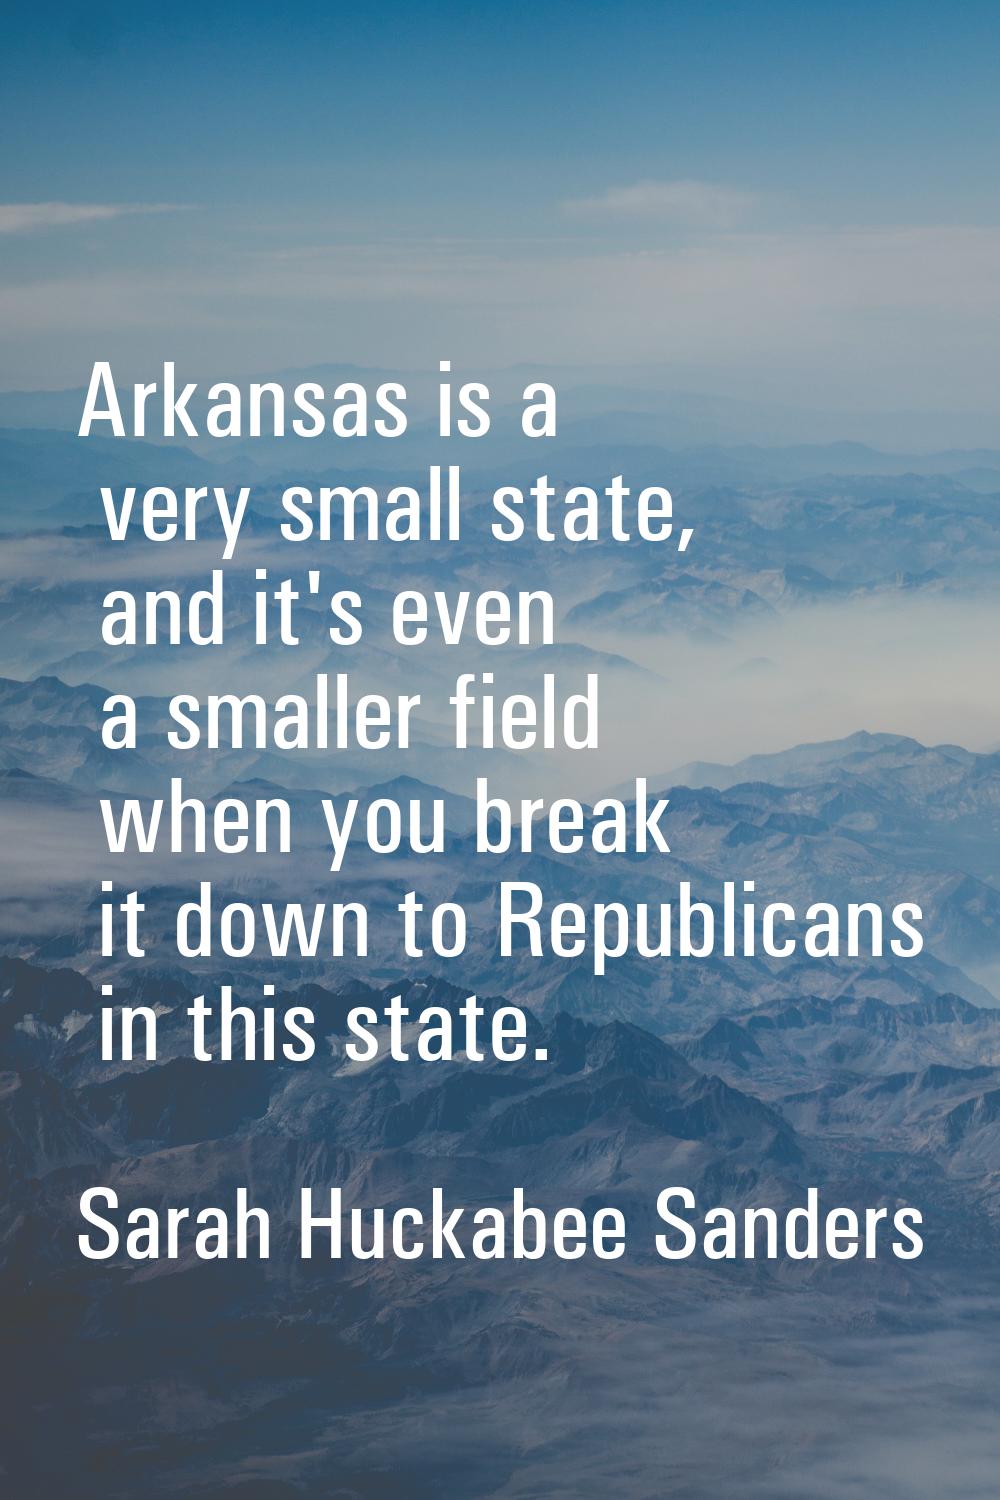 Arkansas is a very small state, and it's even a smaller field when you break it down to Republicans